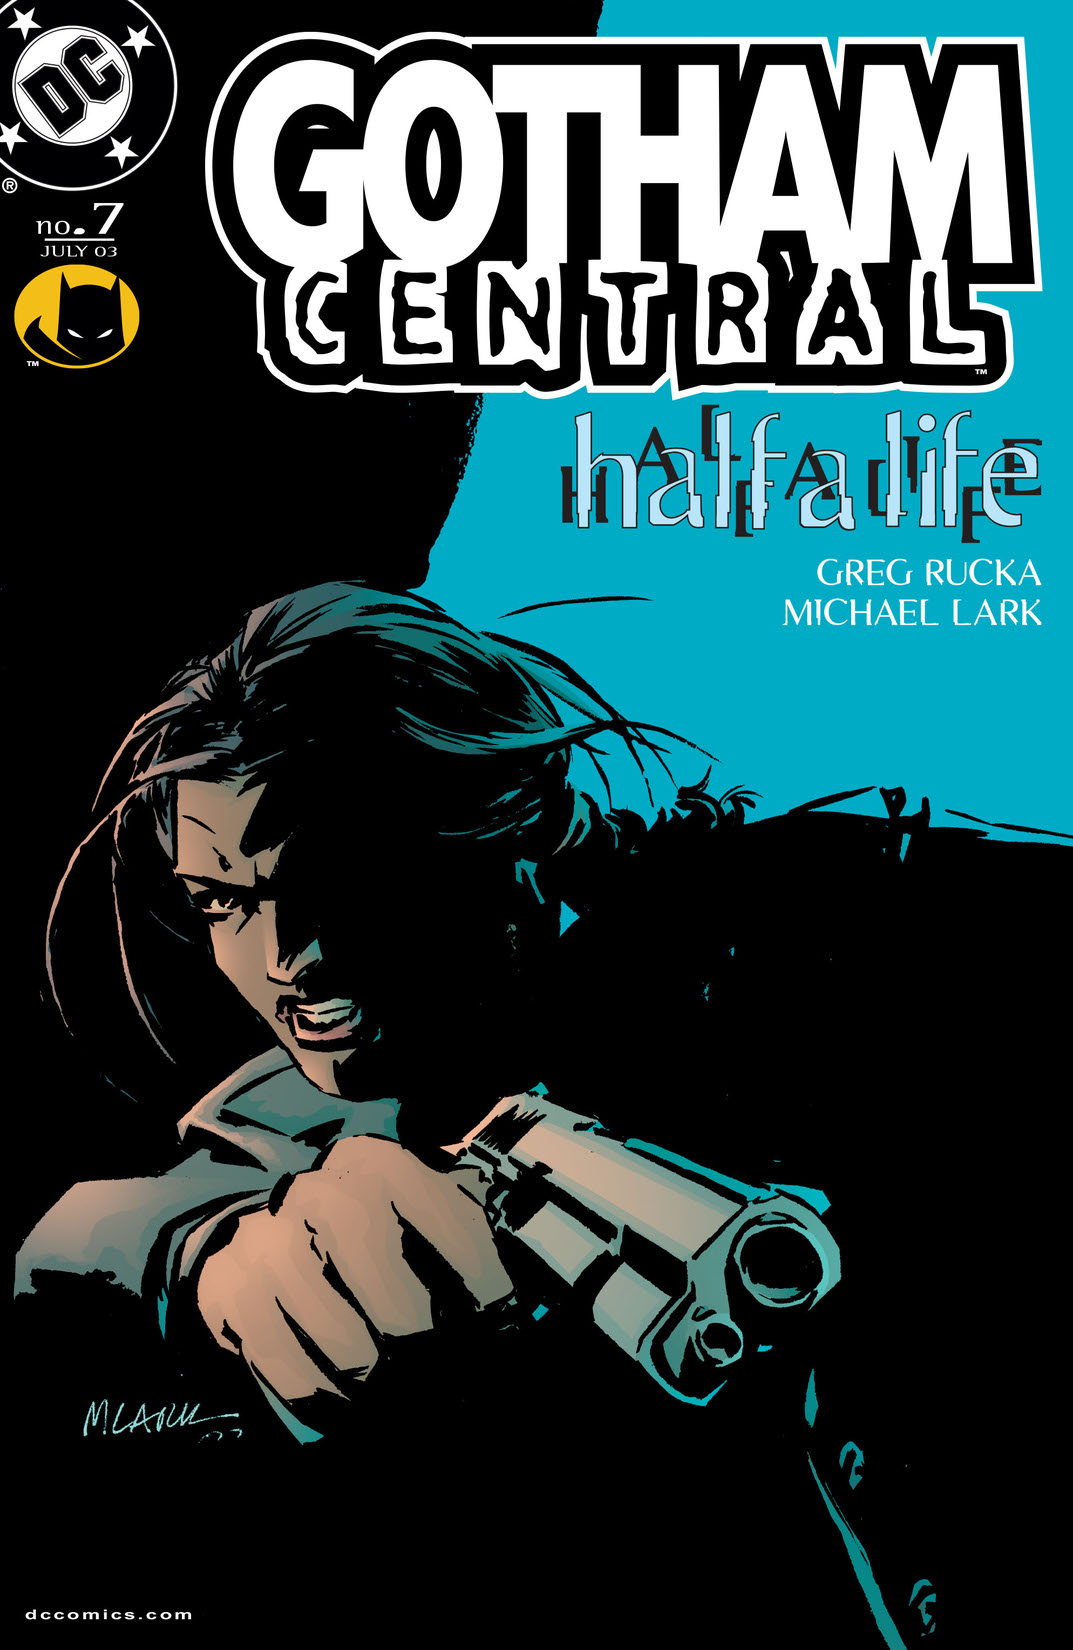 Gotham Central #7 preview images